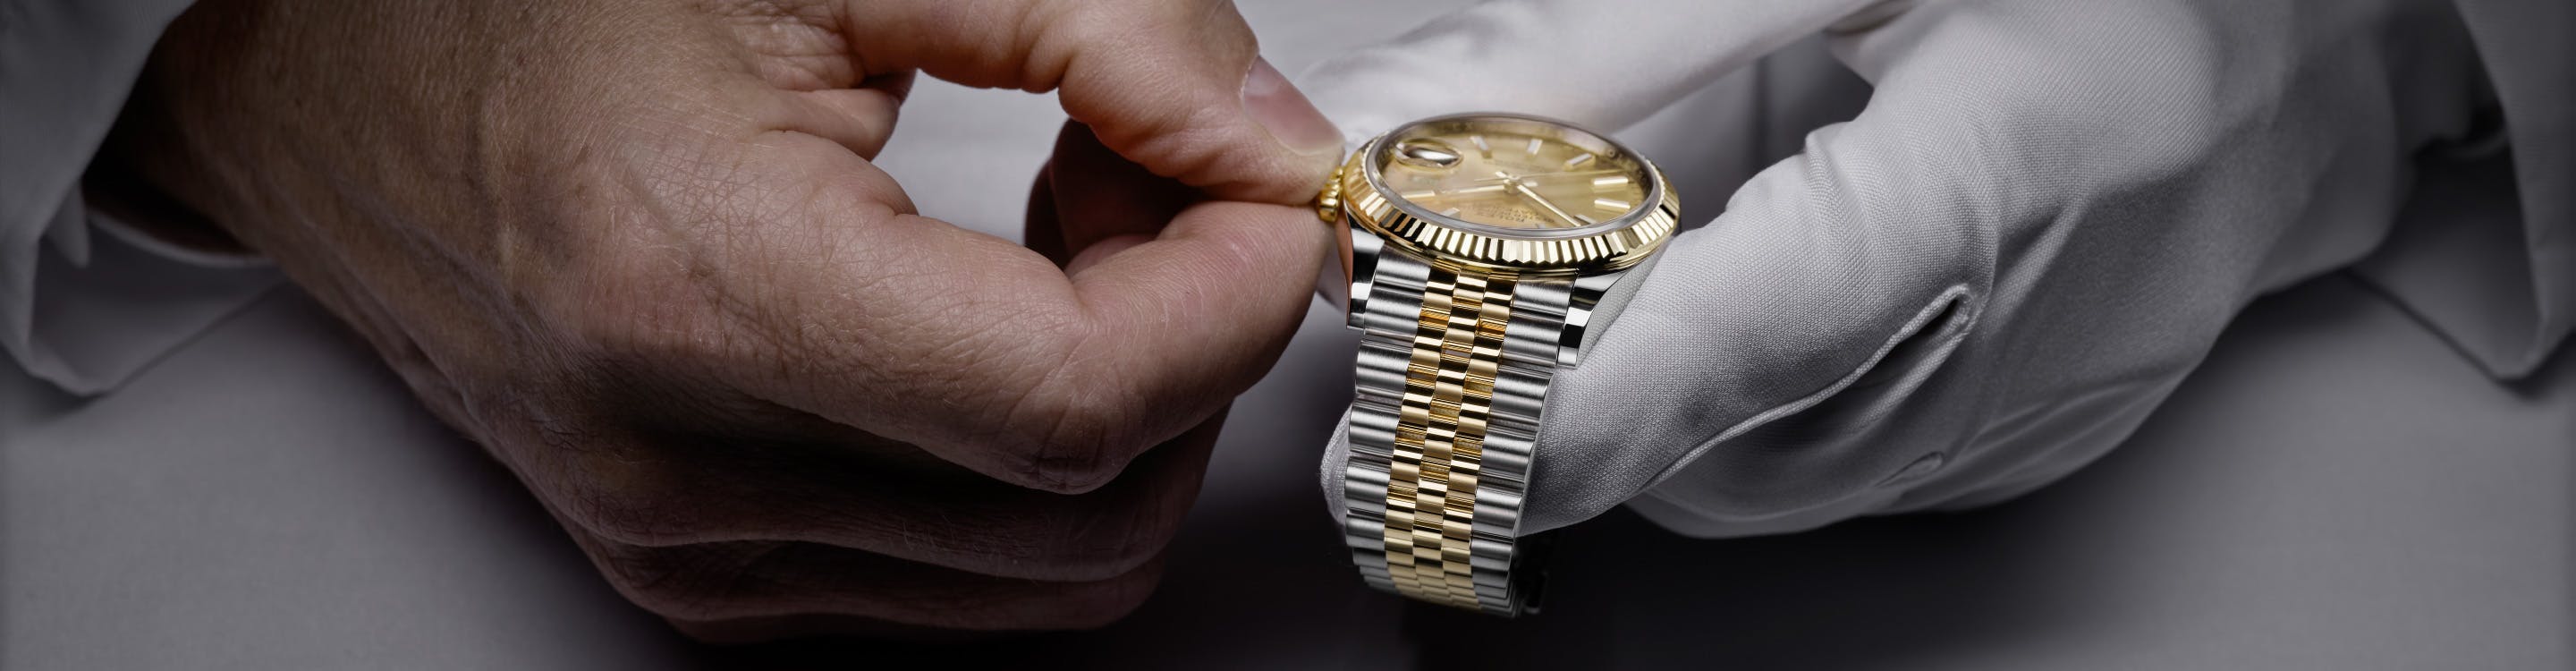 Photo of two hands holding a Rolex watch